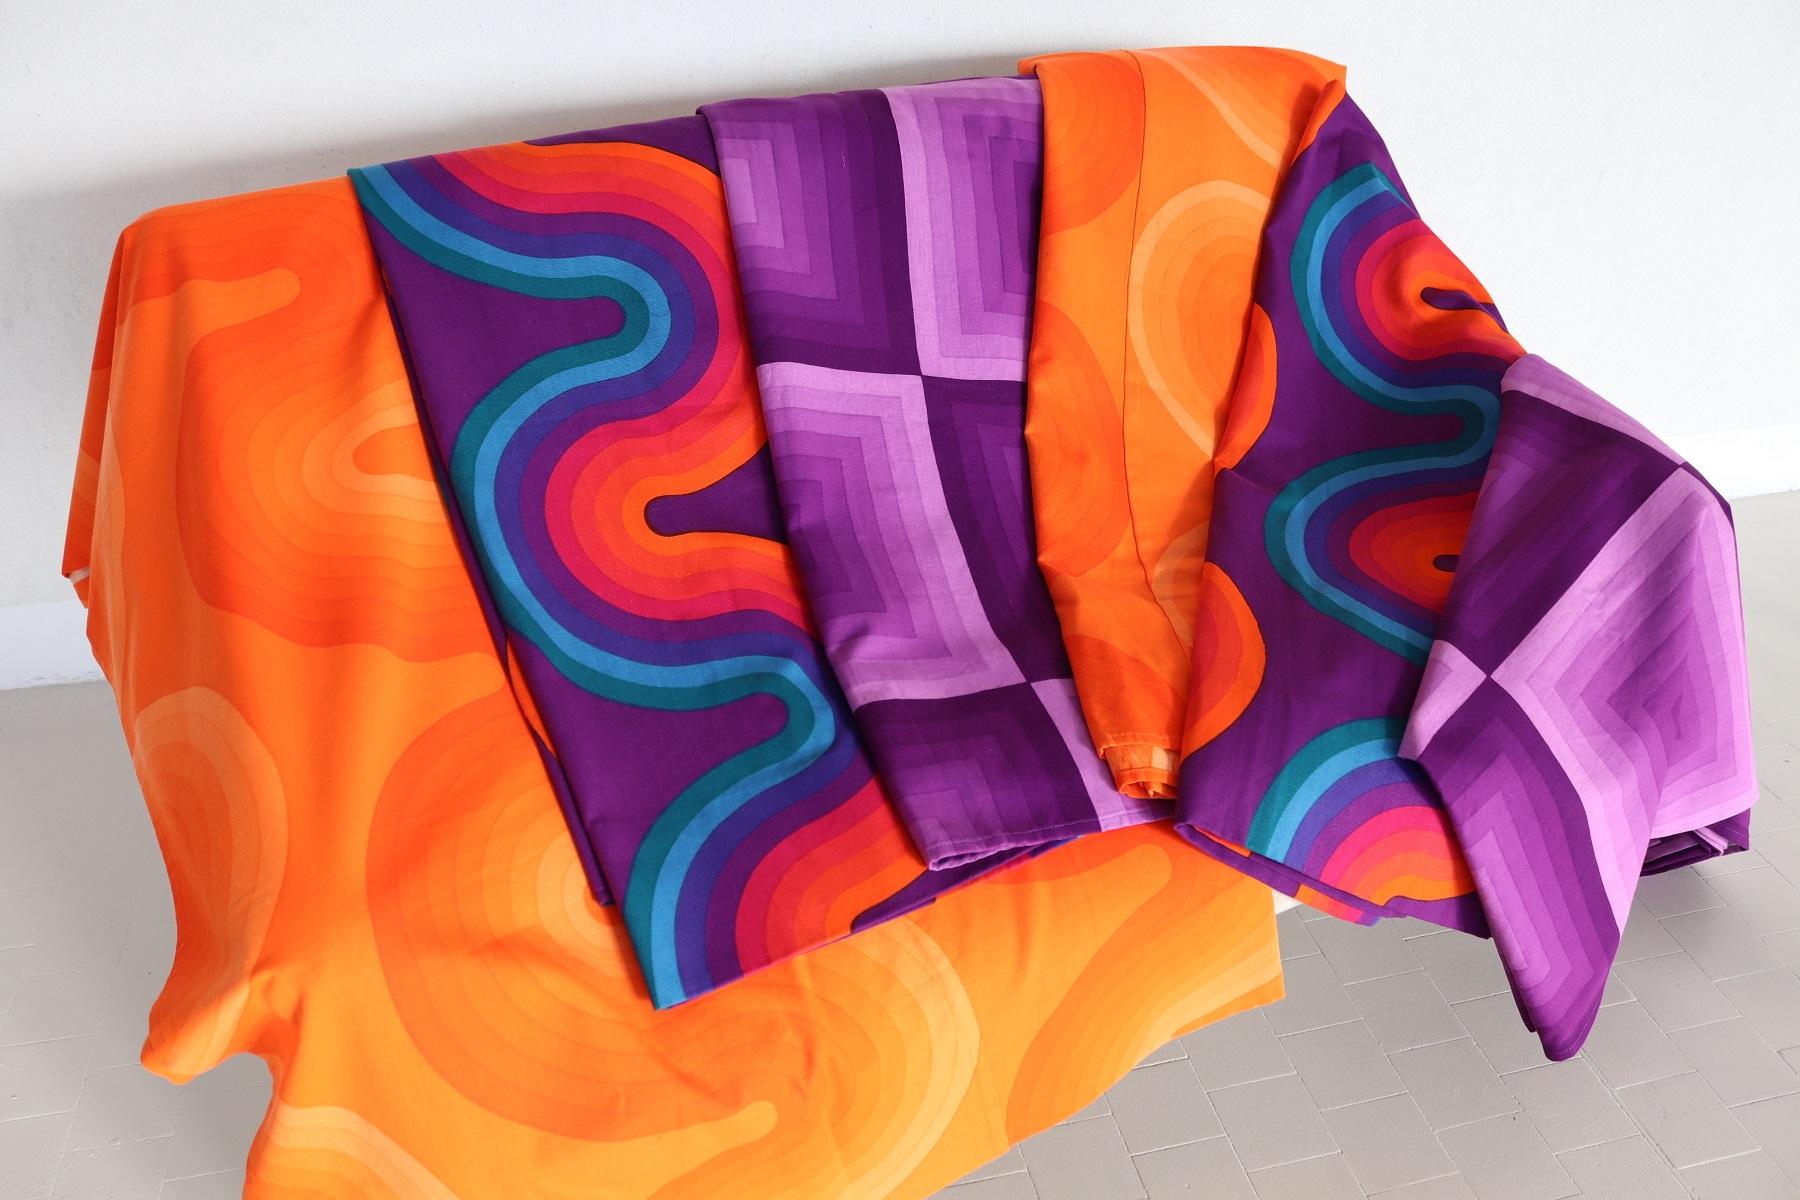 Swiss Verner Panton Curtain Panel, Tapestry, Fabric by Mira-X Collection, 1960s For Sale